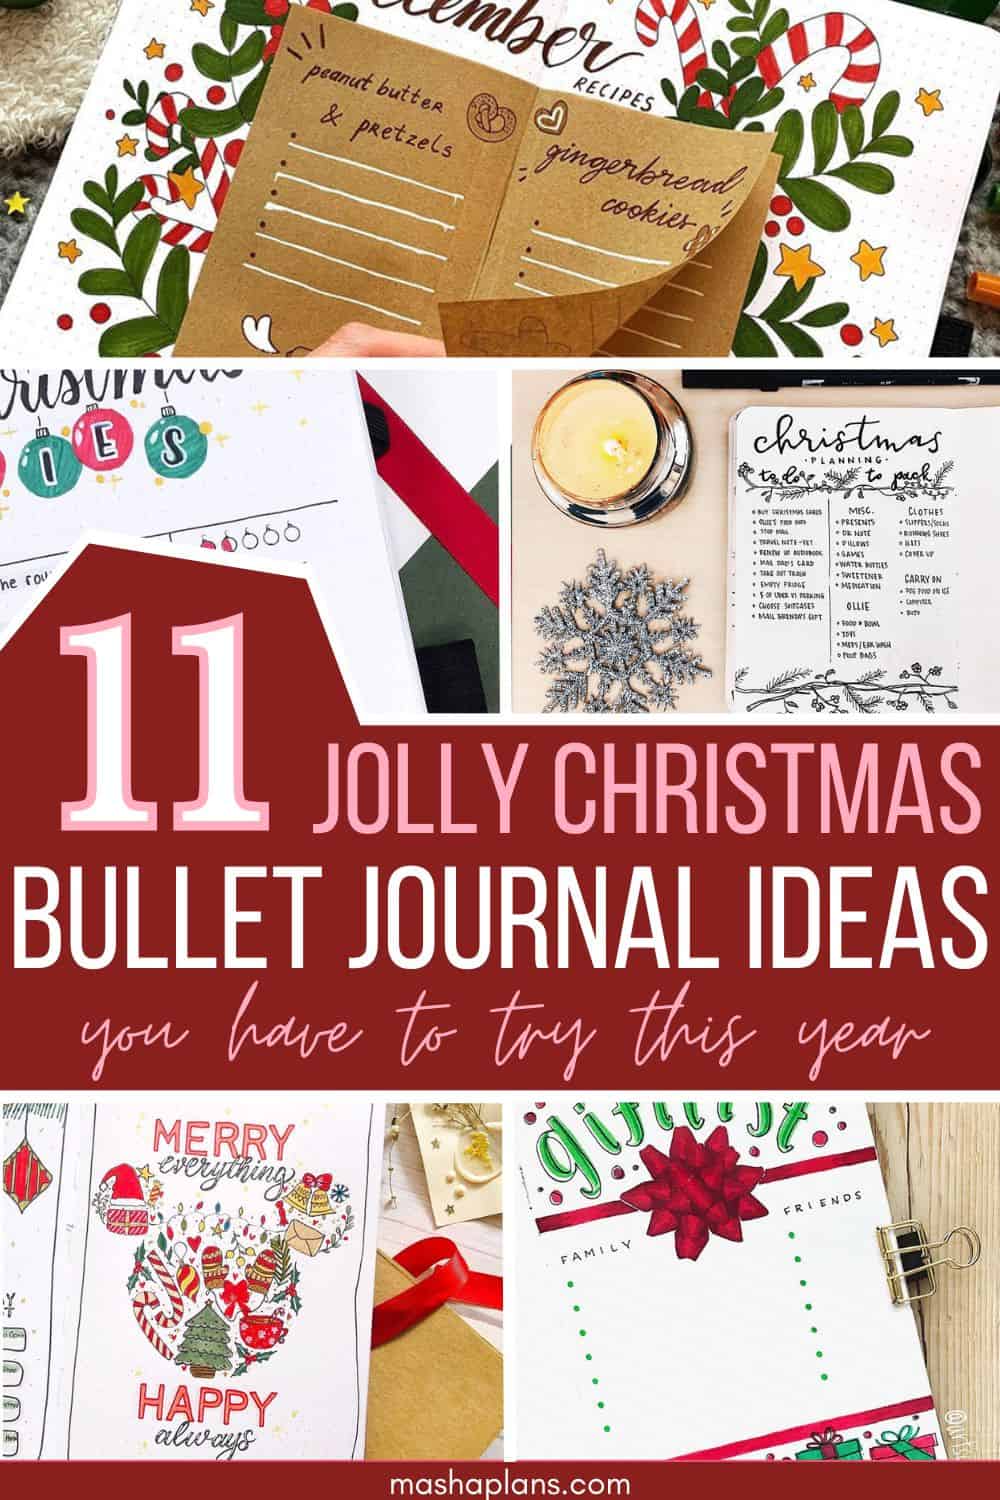 11 Christmas Journal Ideas to Brighten Up Your Bullet Journal | Masha Plans